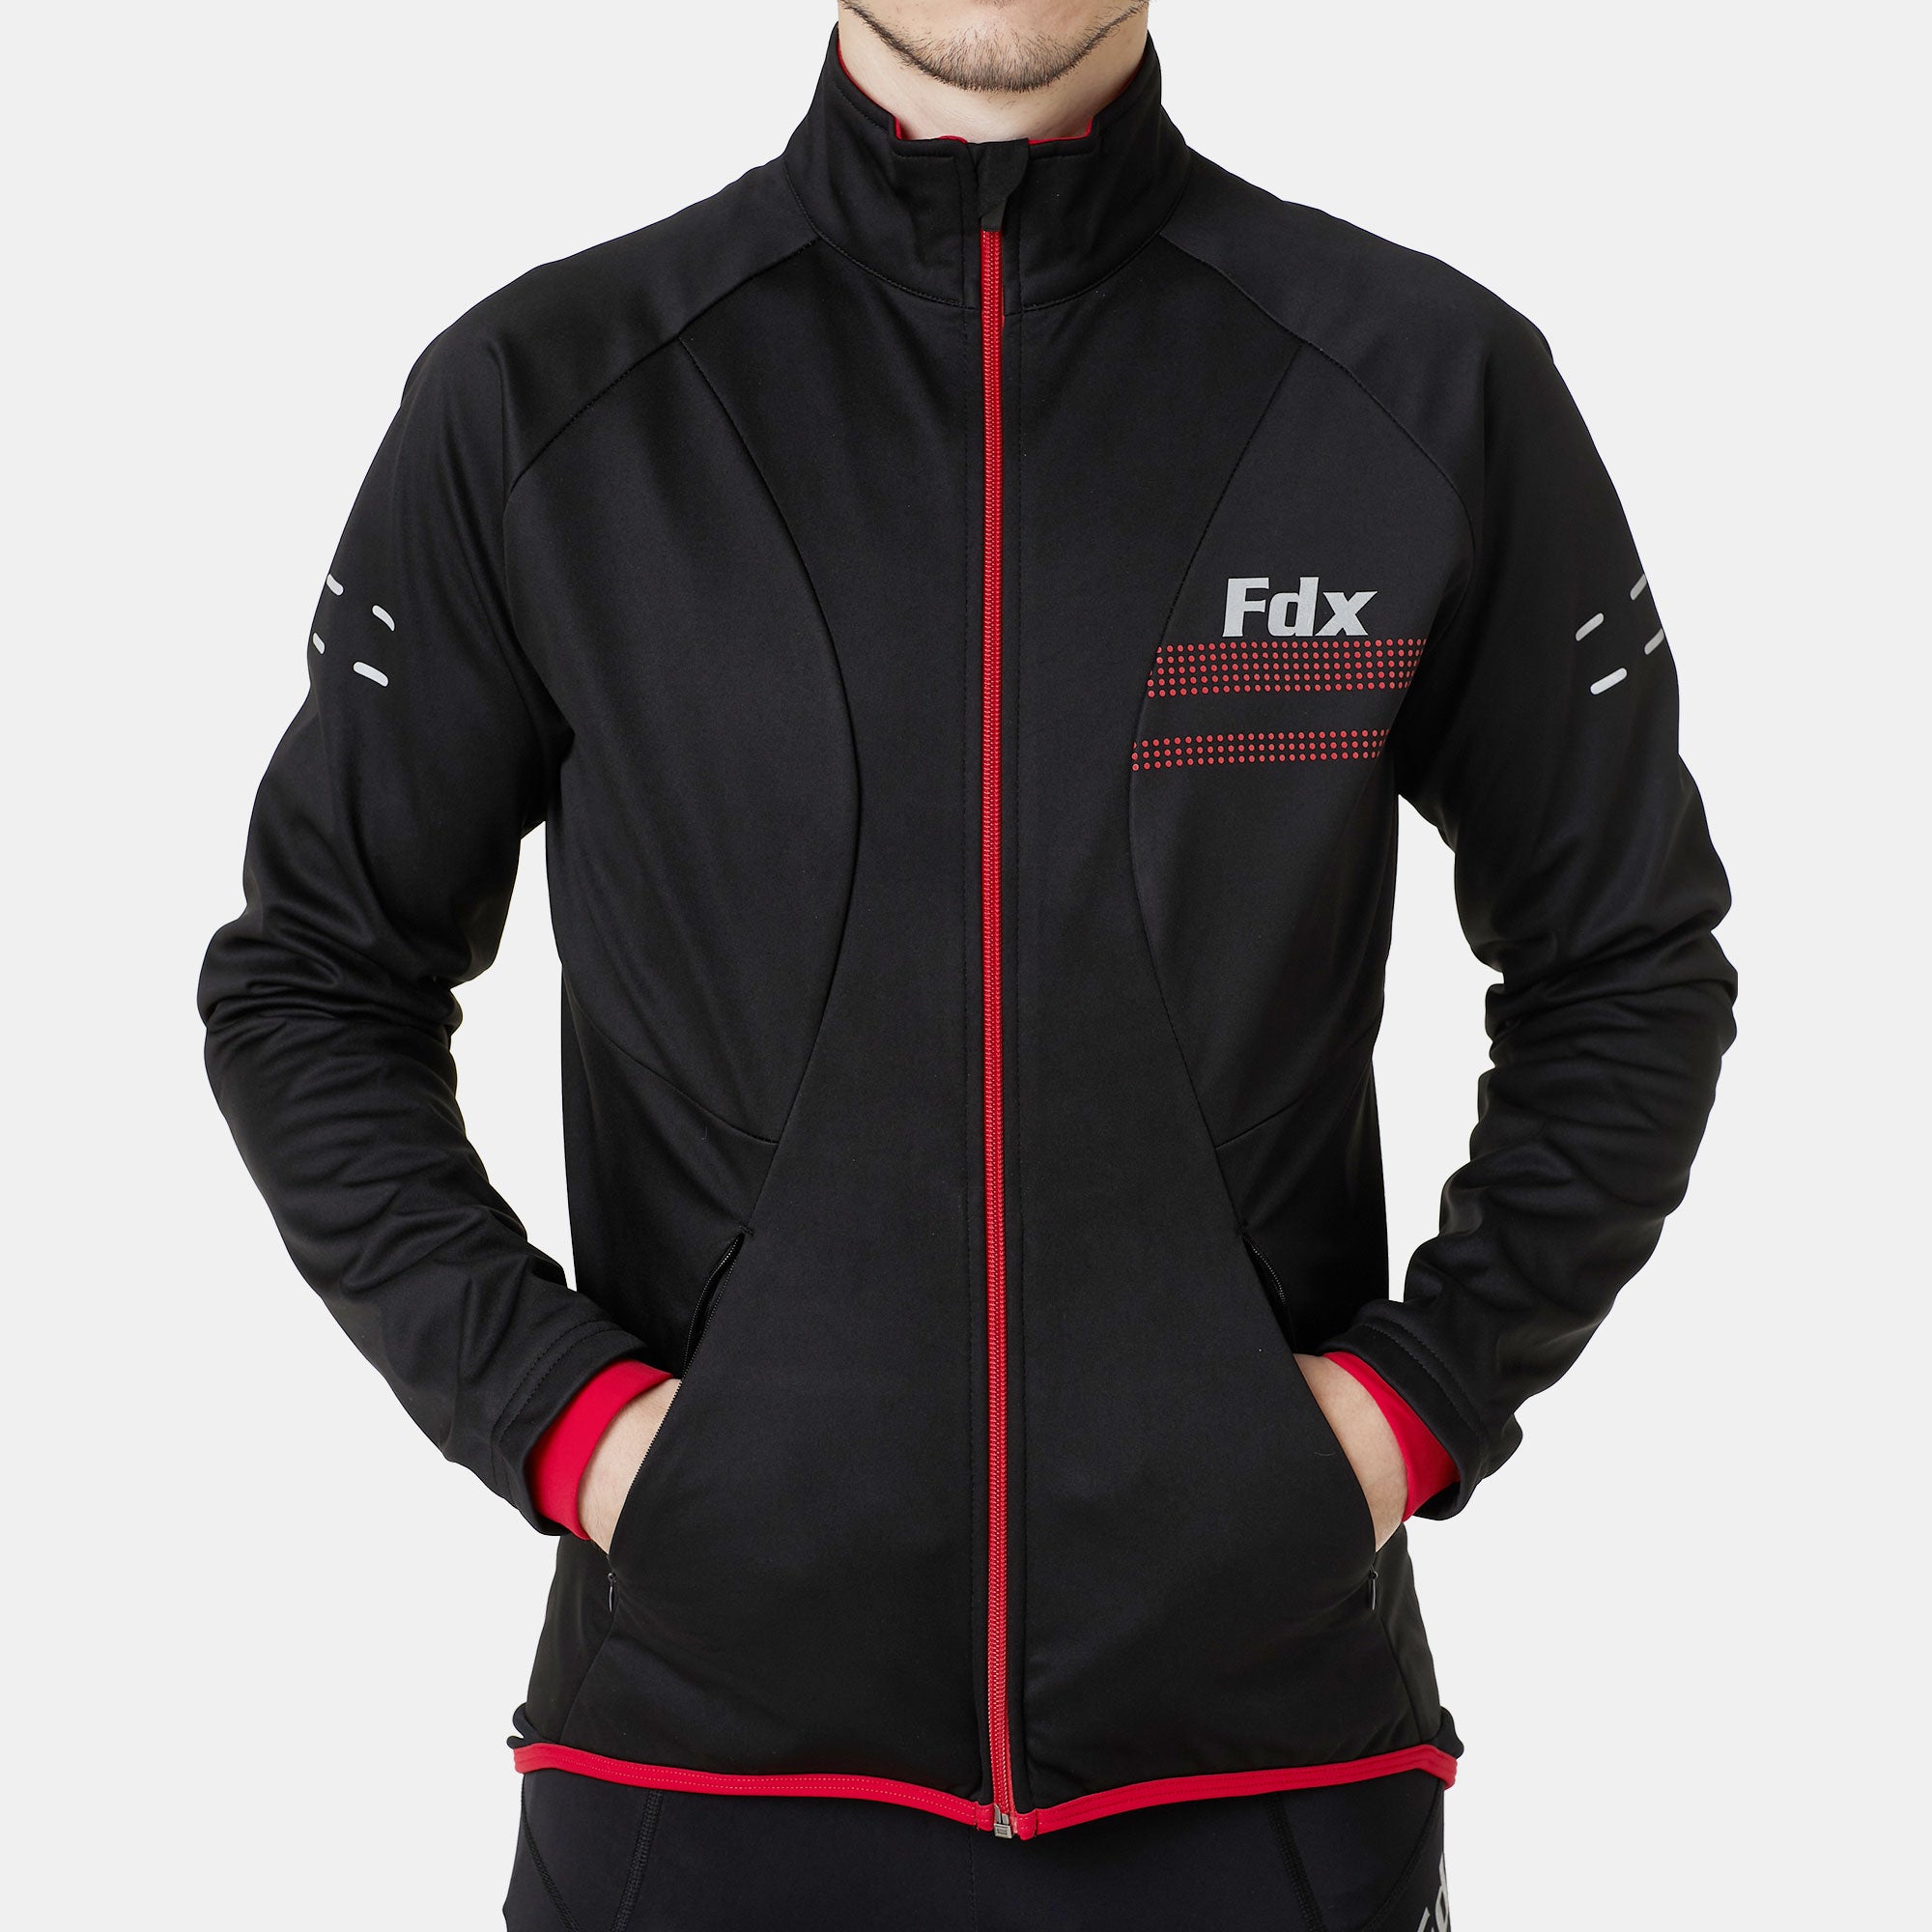 Fdx Mens Black & Red Cycling Jacket for Winter Thermal Casual Softshell Clothing Lightweight, Windproof, Waterproof & Pockets - Arch